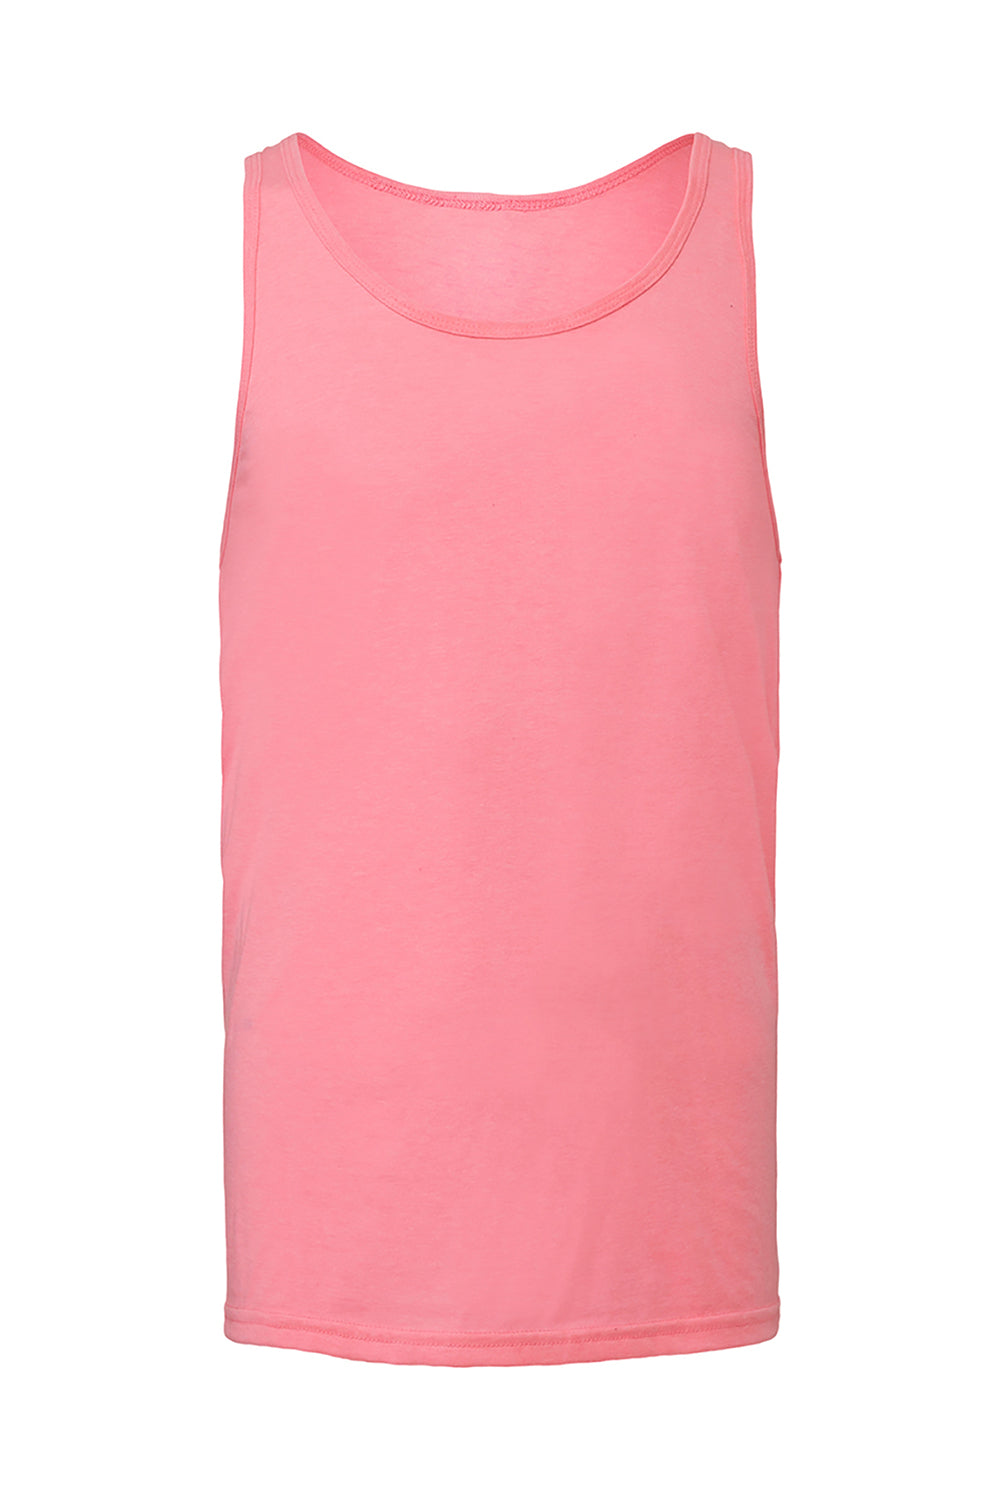 Bella + Canvas BC3480/3480 Mens Jersey Tank Top Neon Pink Flat Front